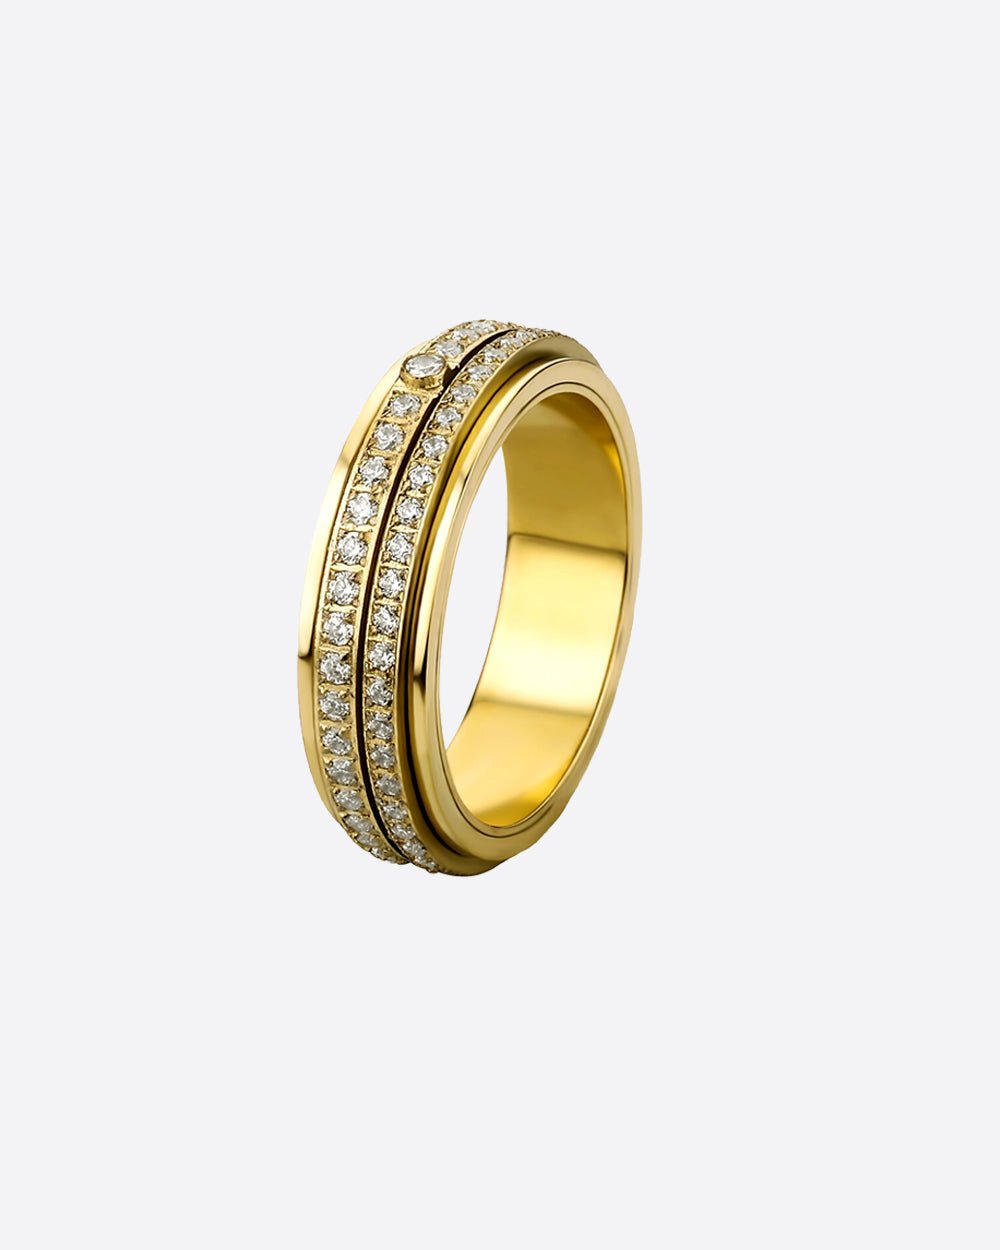 ICED ROWS RING. - 14K GOLD - Drippy Amsterdam